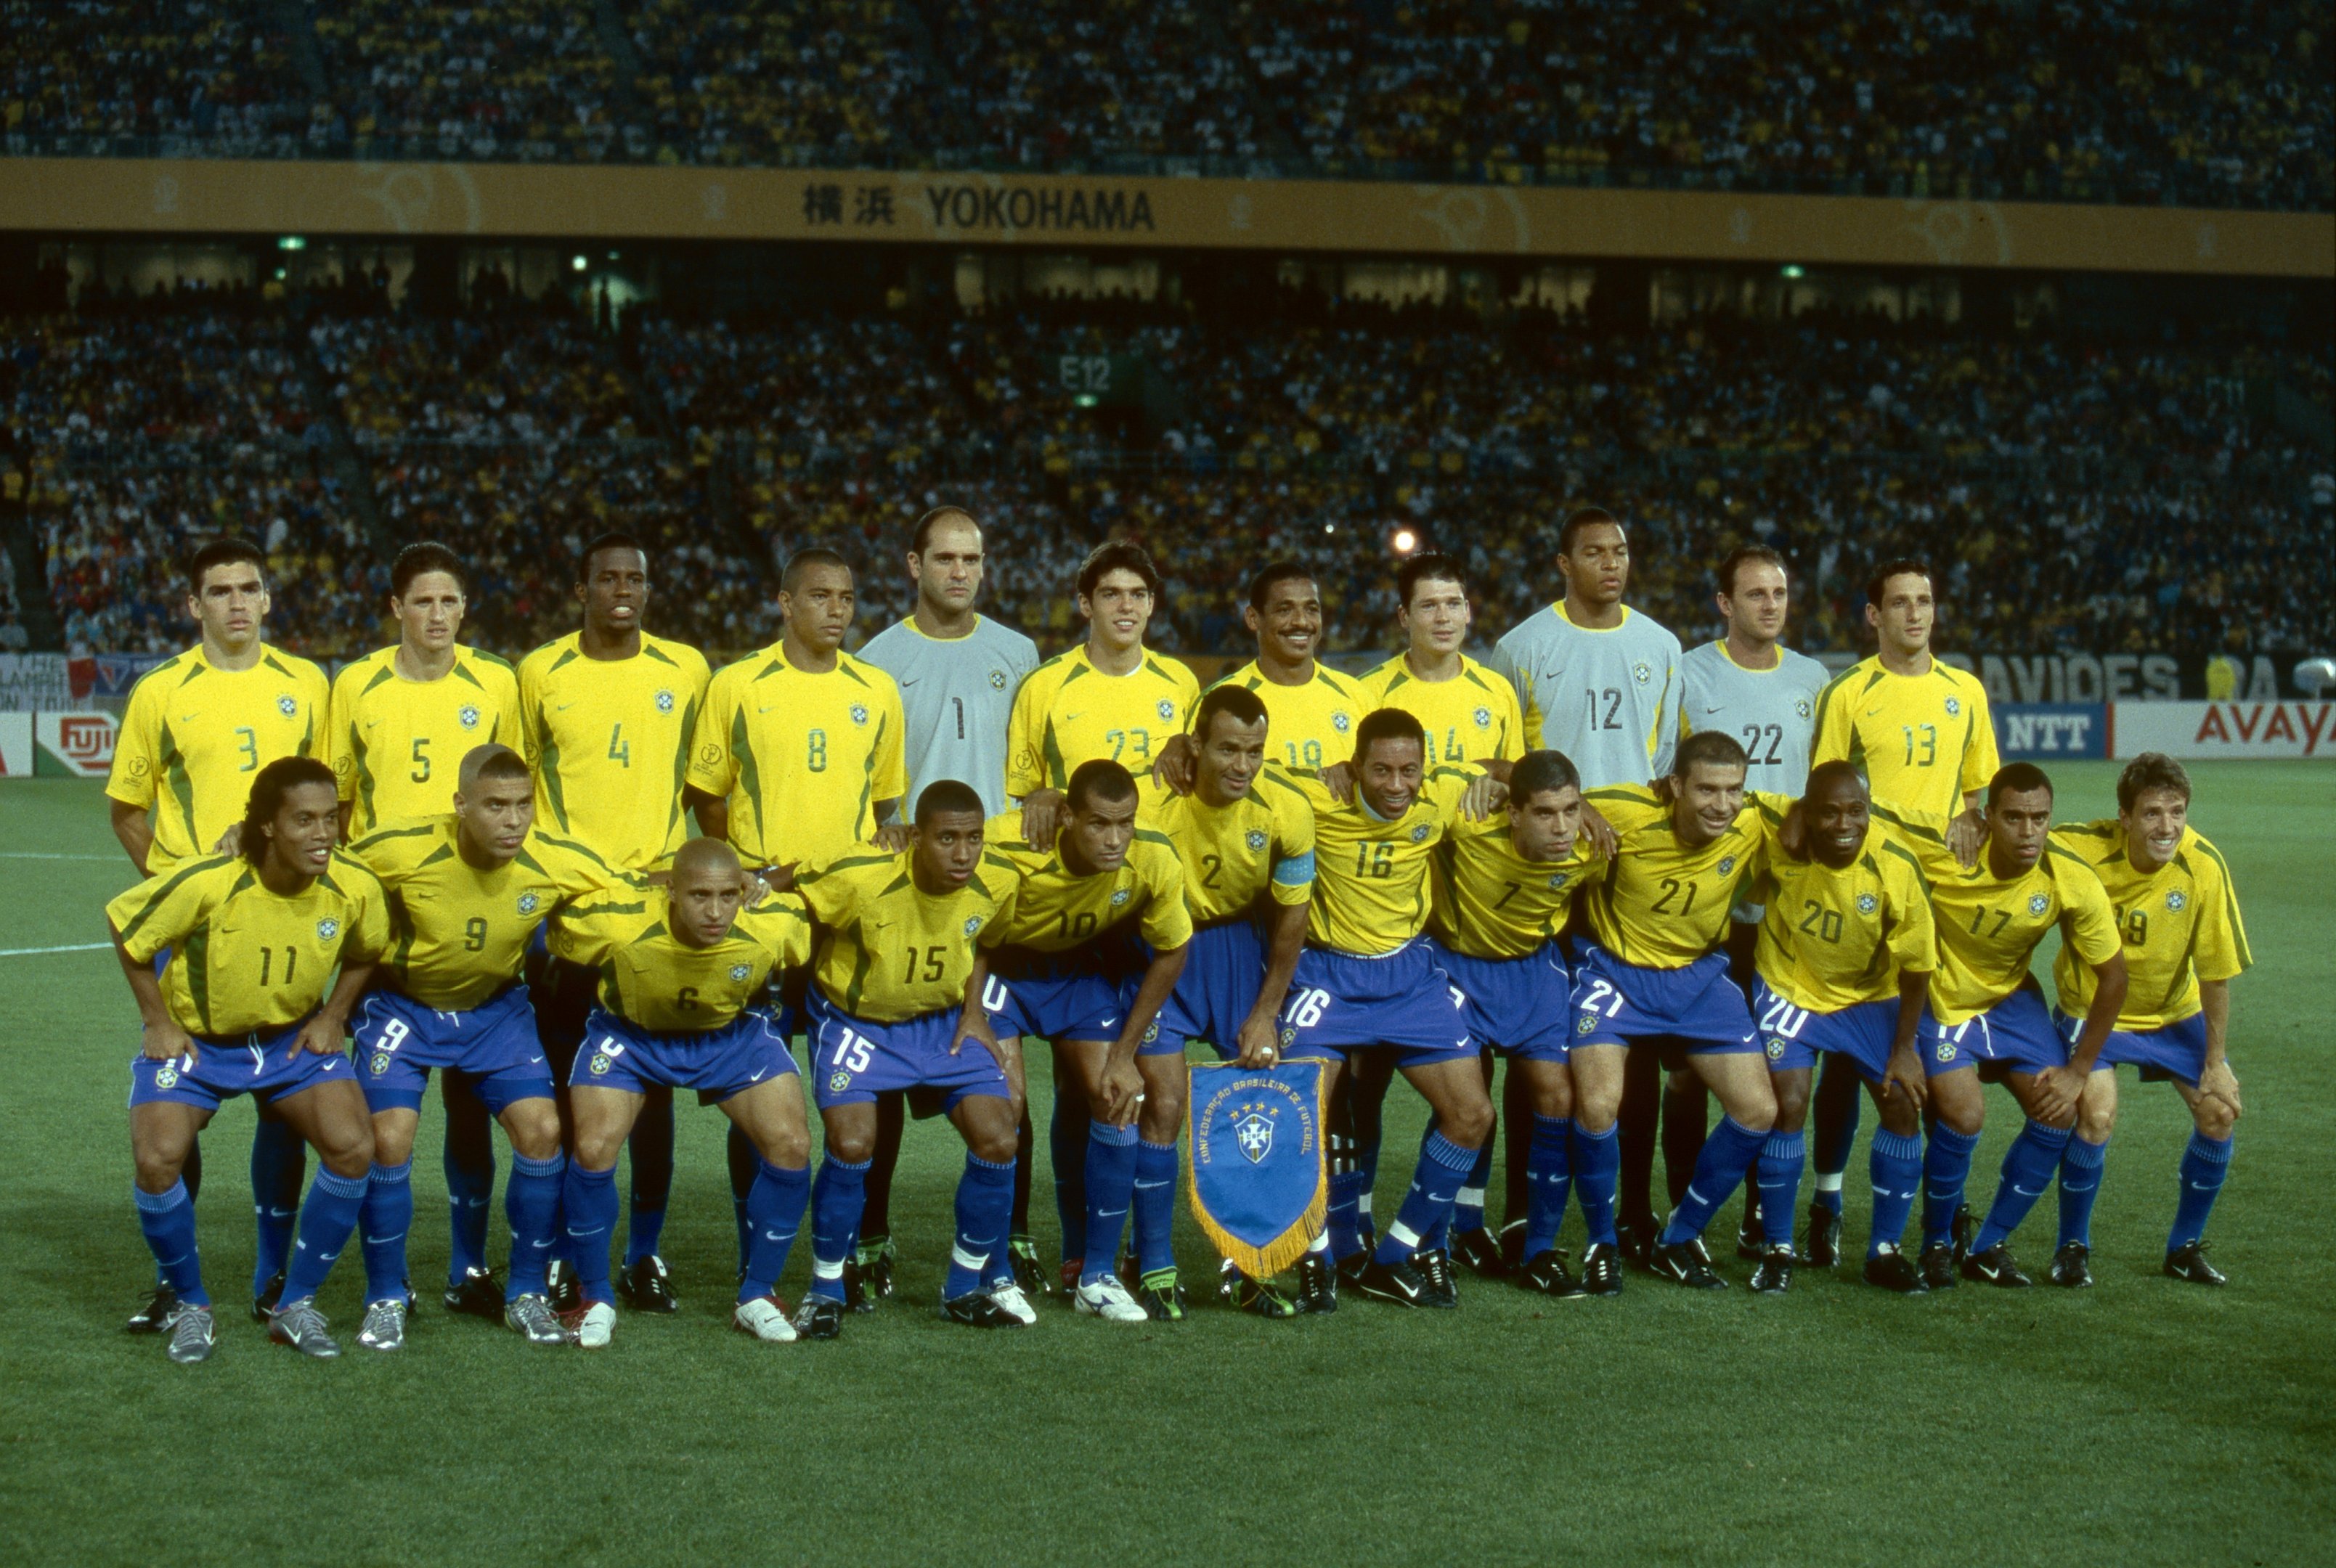 30 June 2002 - FIFA Football World Cup FINAL - Brazil v Germany - The Brazilian squad line up for a squad photo including the likes of Ronaldinho, Ronaldo, Roberto Carlos, Dida and Rivaldo. (Photo by Mark Leech/Getty Images)